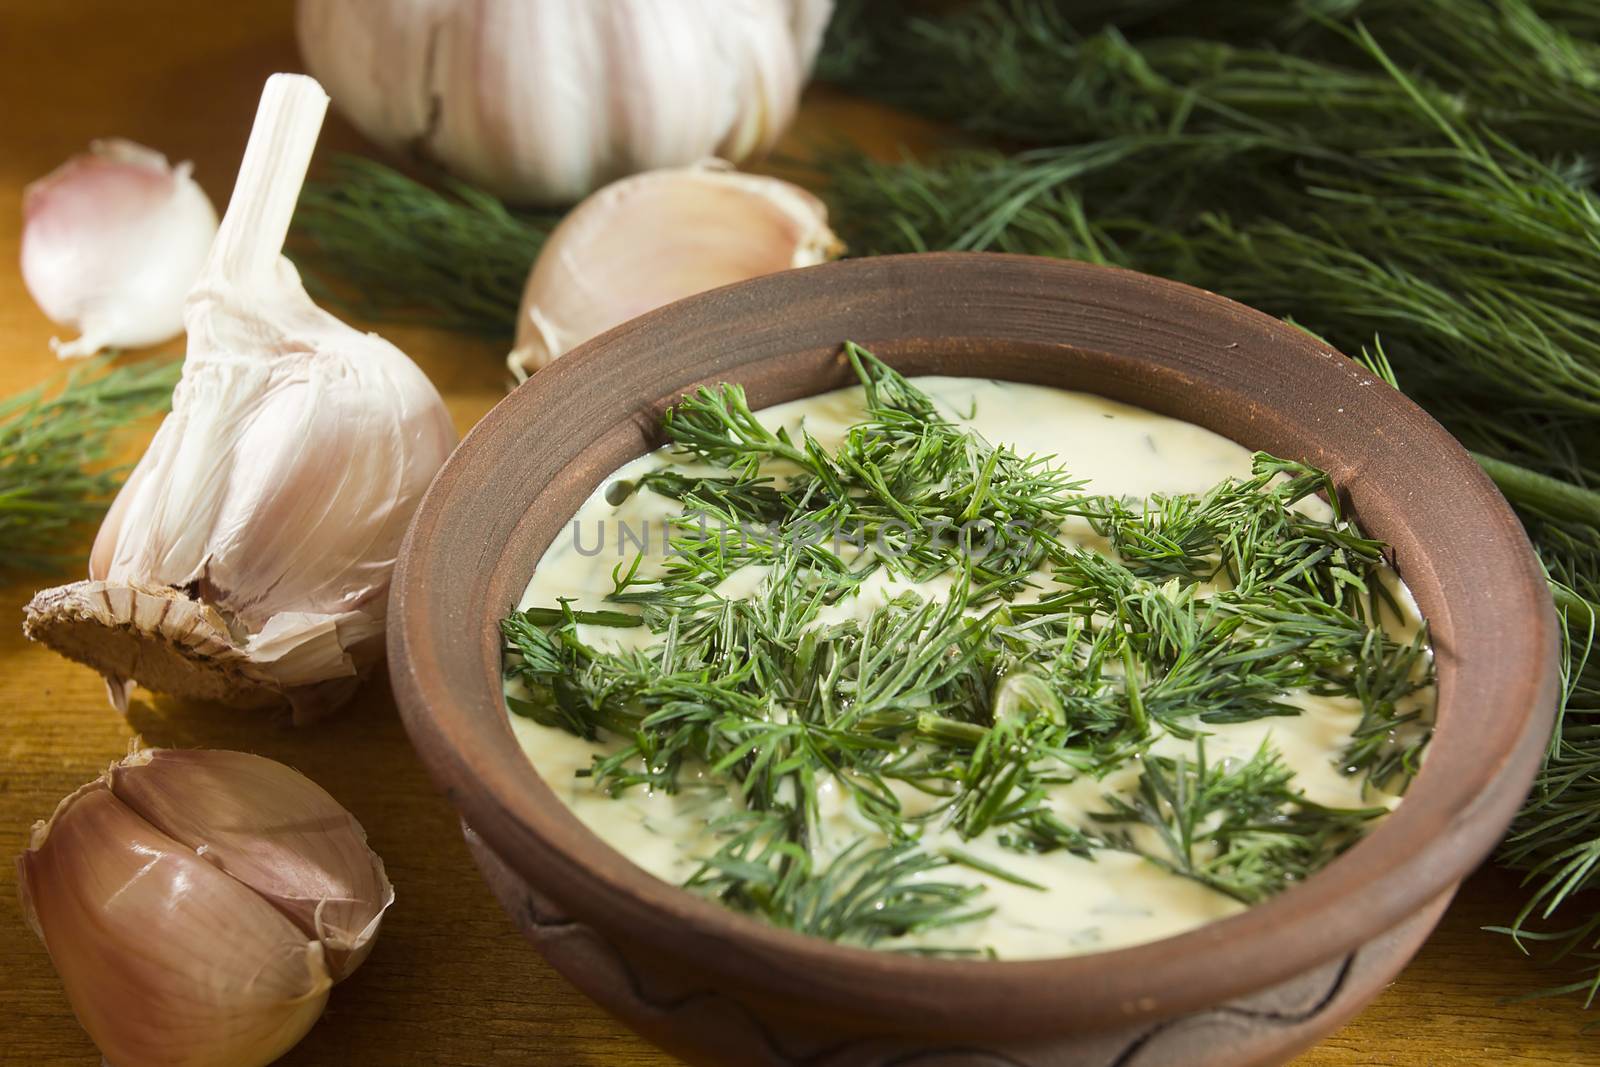 Garlic dip sauce with fresh herbs of dill